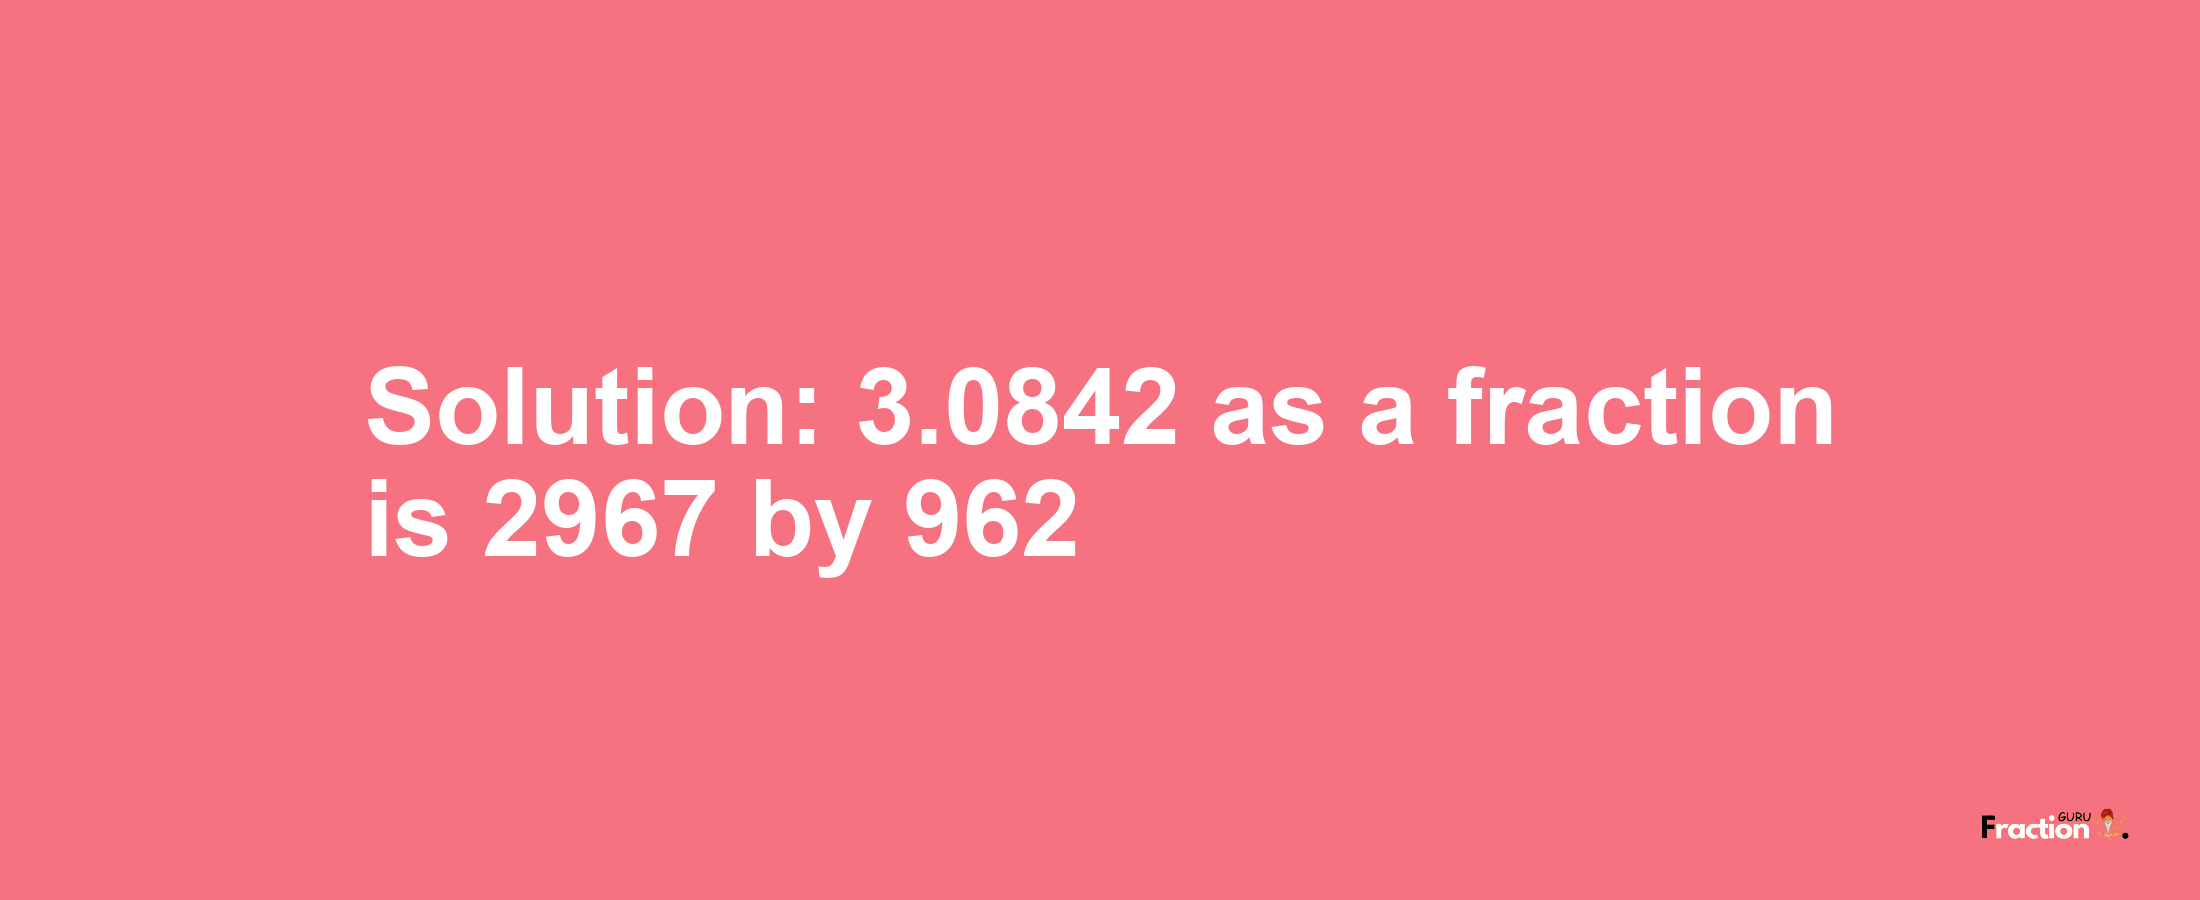 Solution:3.0842 as a fraction is 2967/962